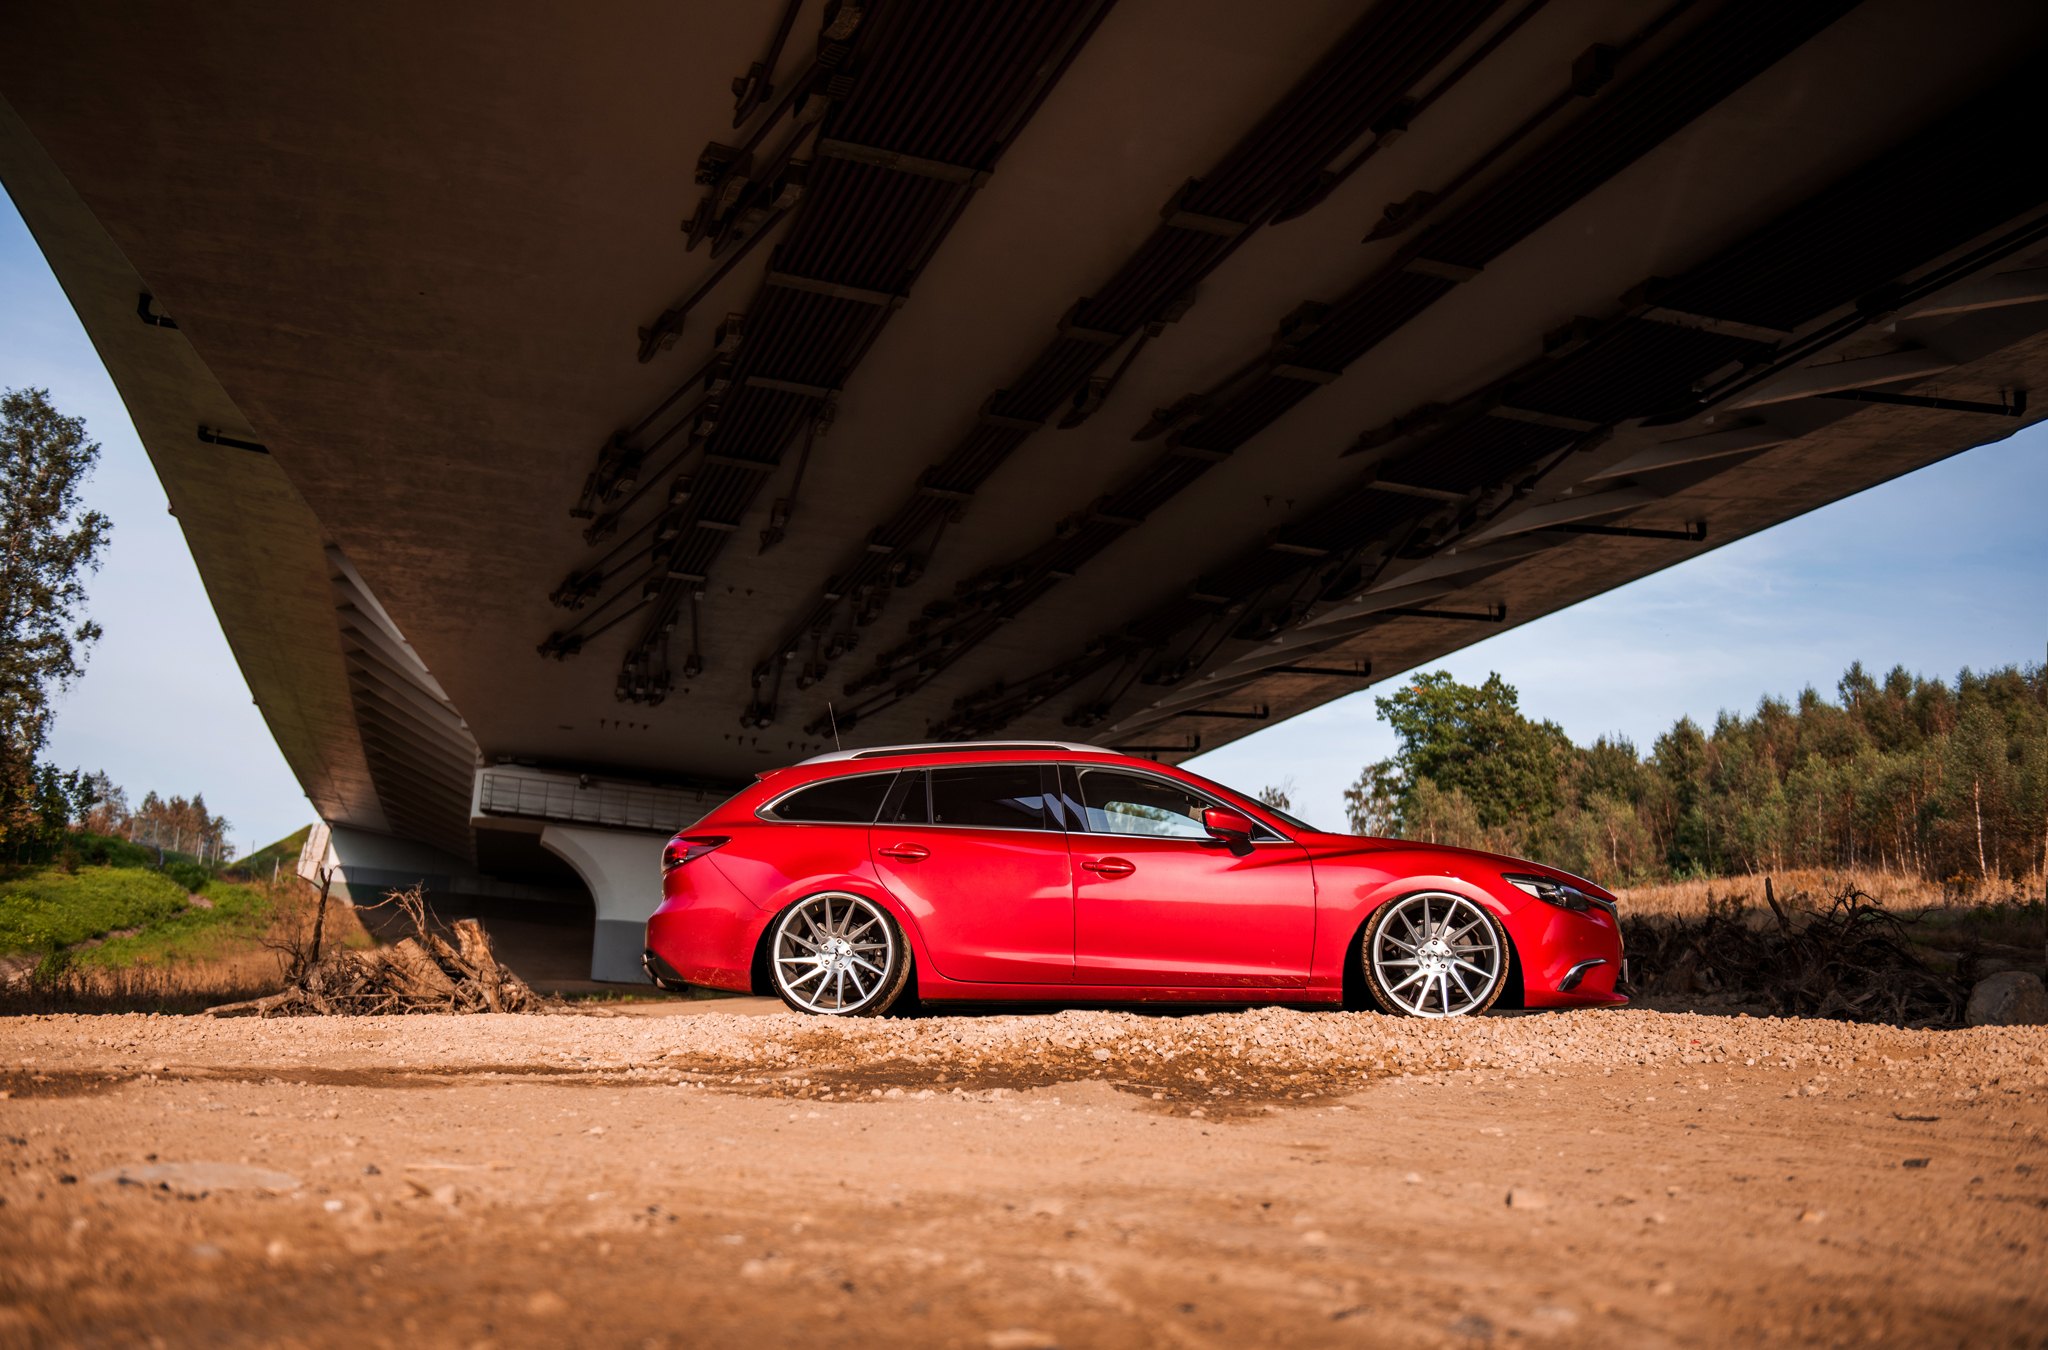 Silver Machined JR Wheels on Red Mazda 6 - Photo by JR Wheels